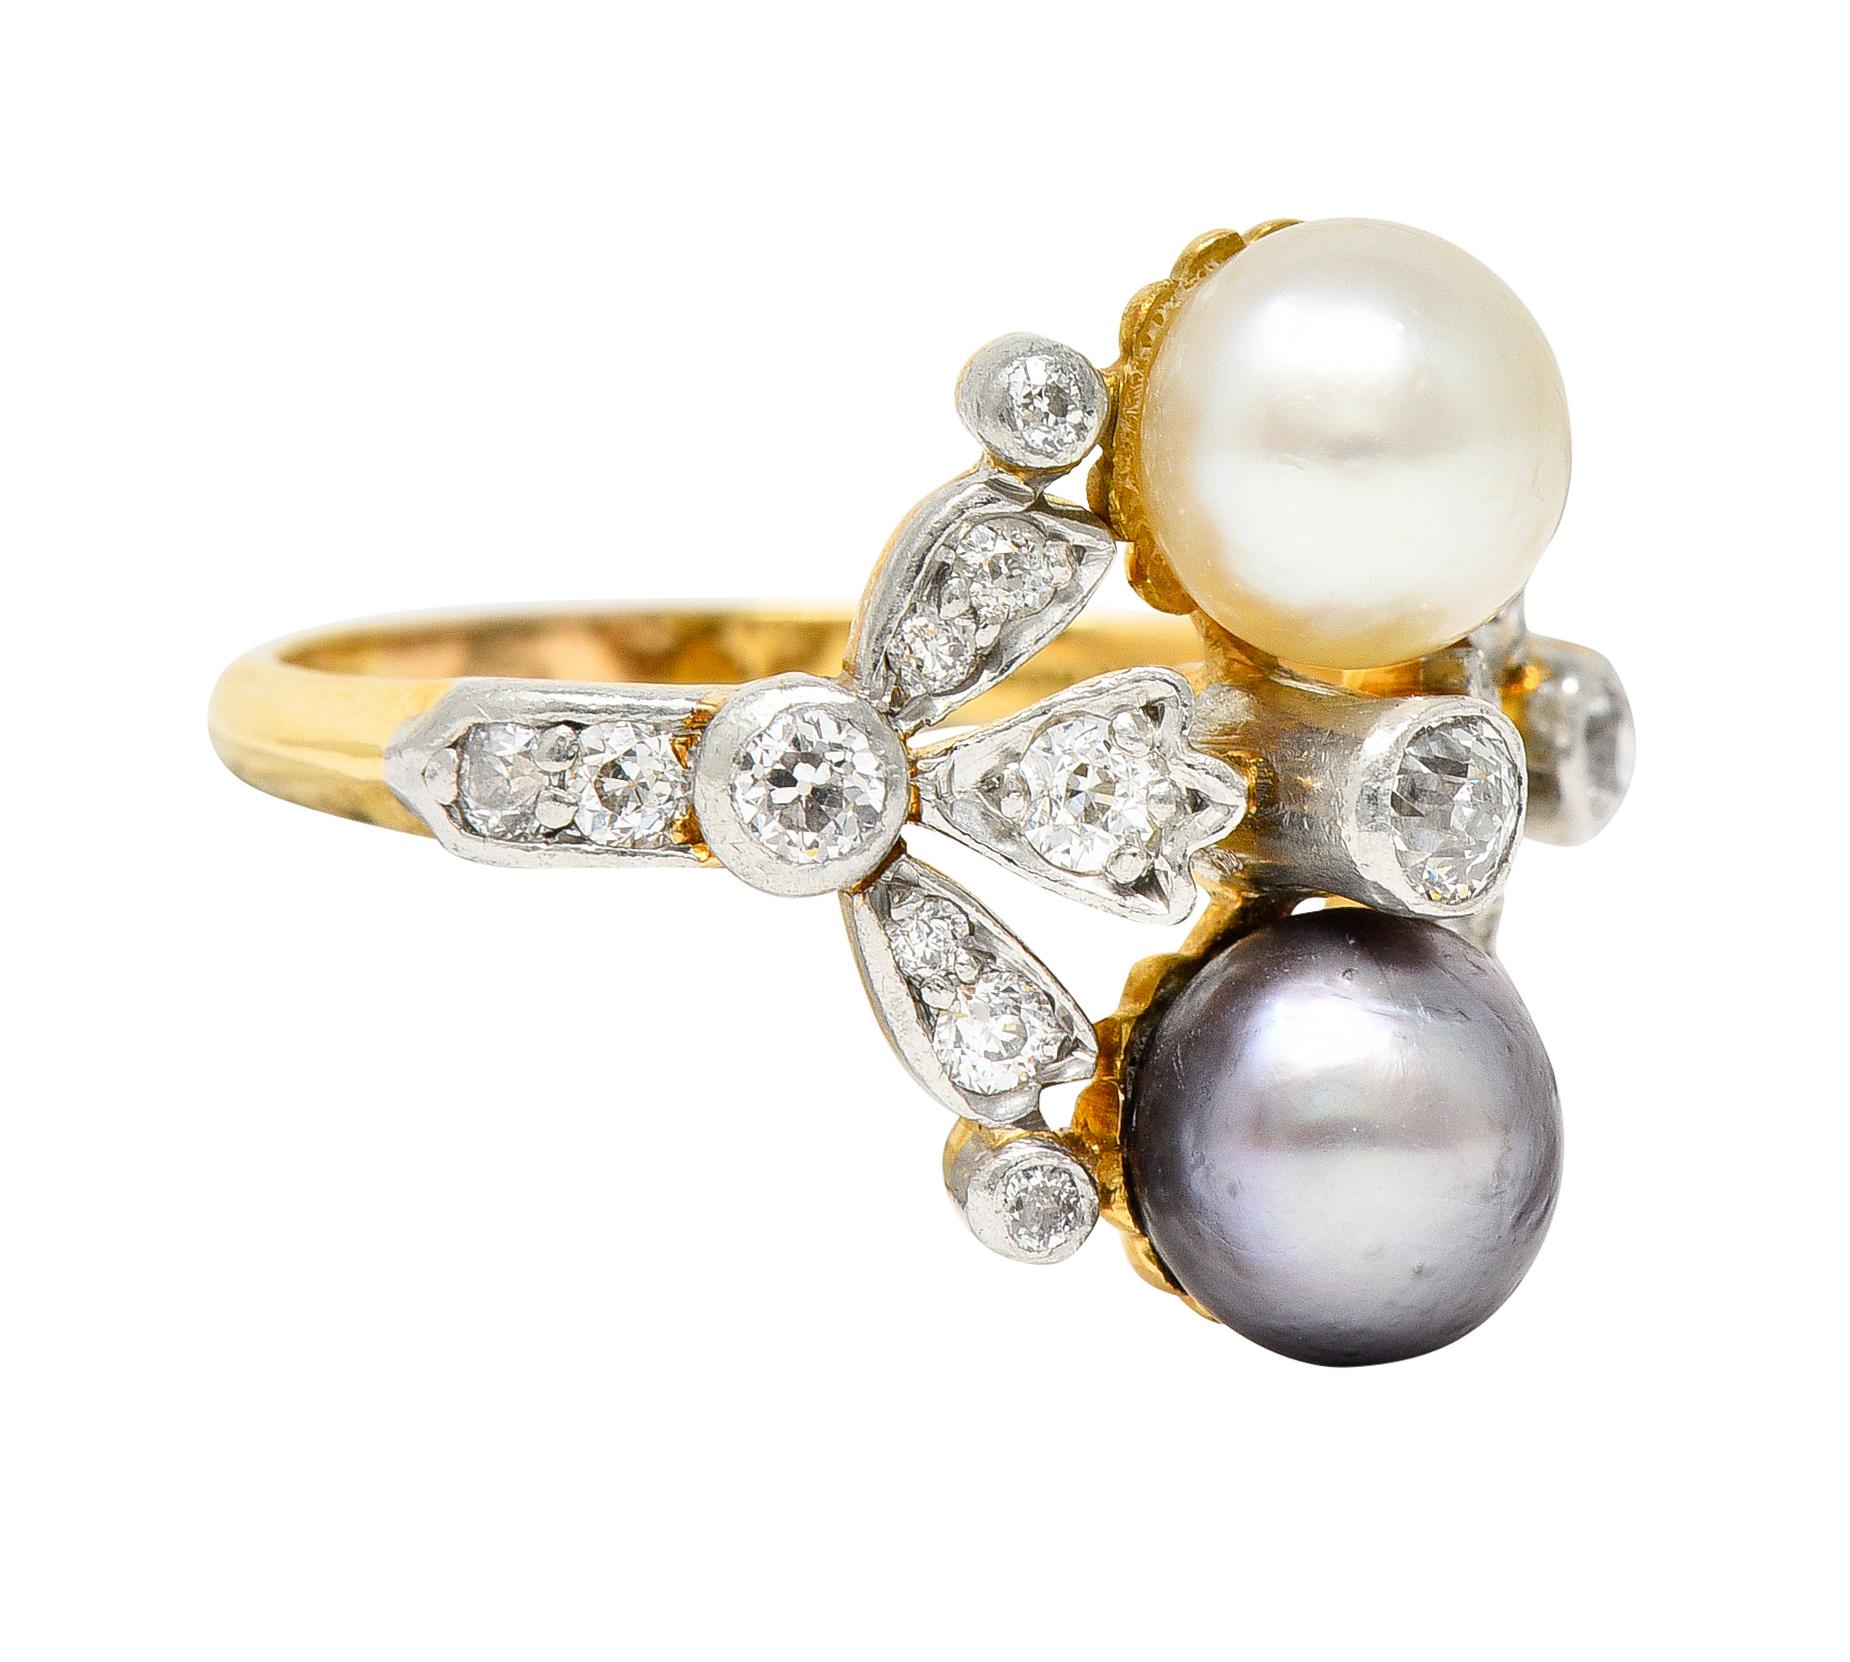 Ring is designed as a stylized floral motif with two 6.5 mm pearls

One is cream in body color while opposing is gray with strong iridescence - both very good in luster

Bezel and bead set throughout by old European and old mine cut